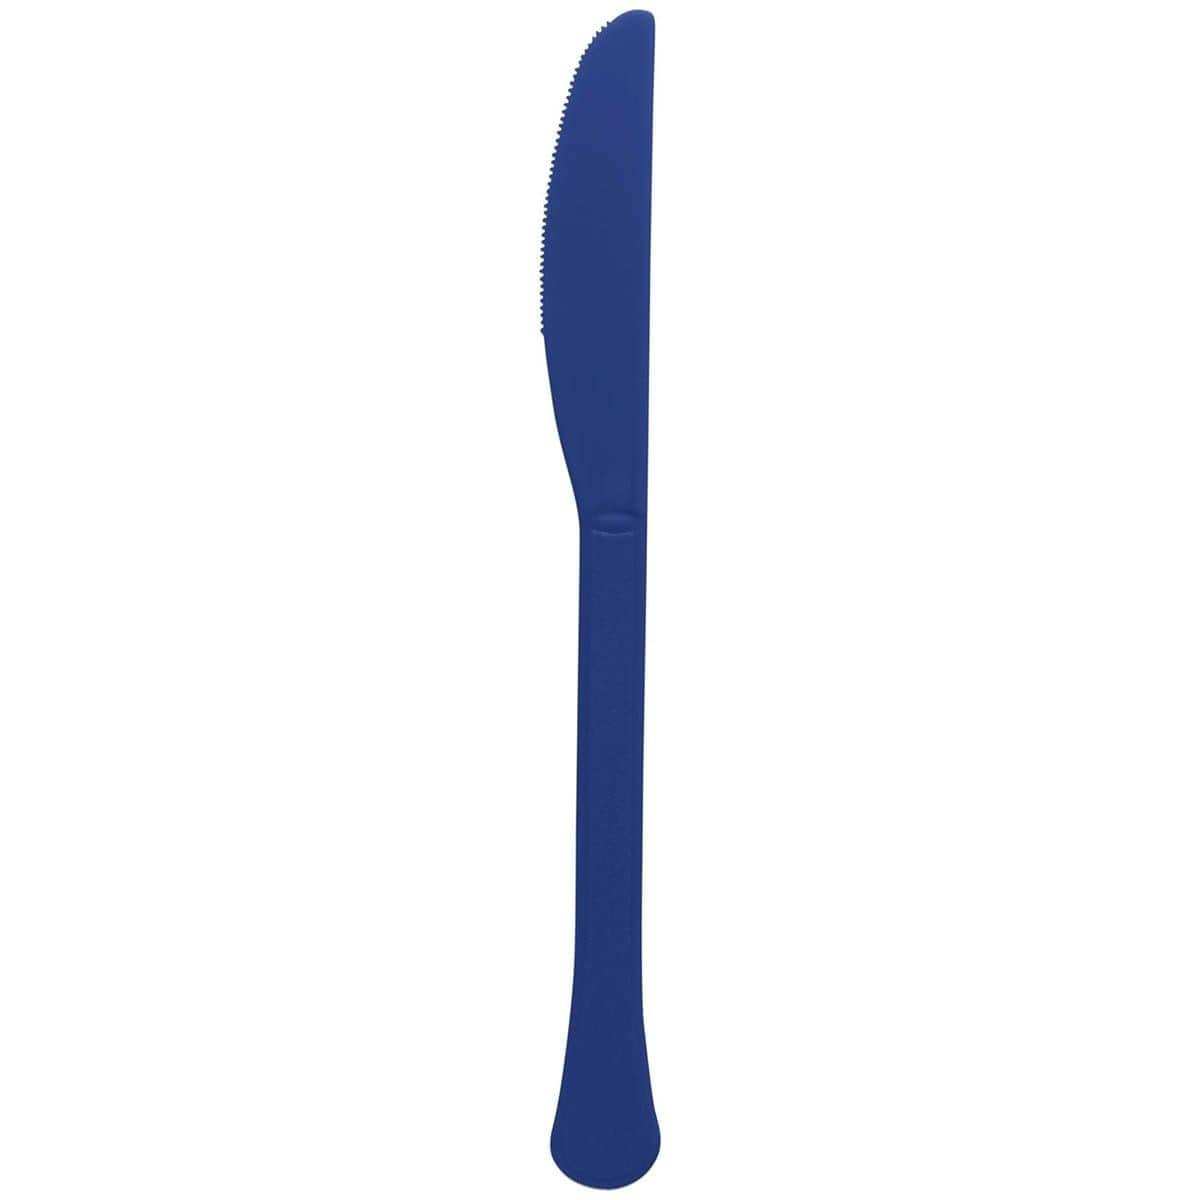 Buy Plasticware True Navy Plastic Knives, 20 Count sold at Party Expert